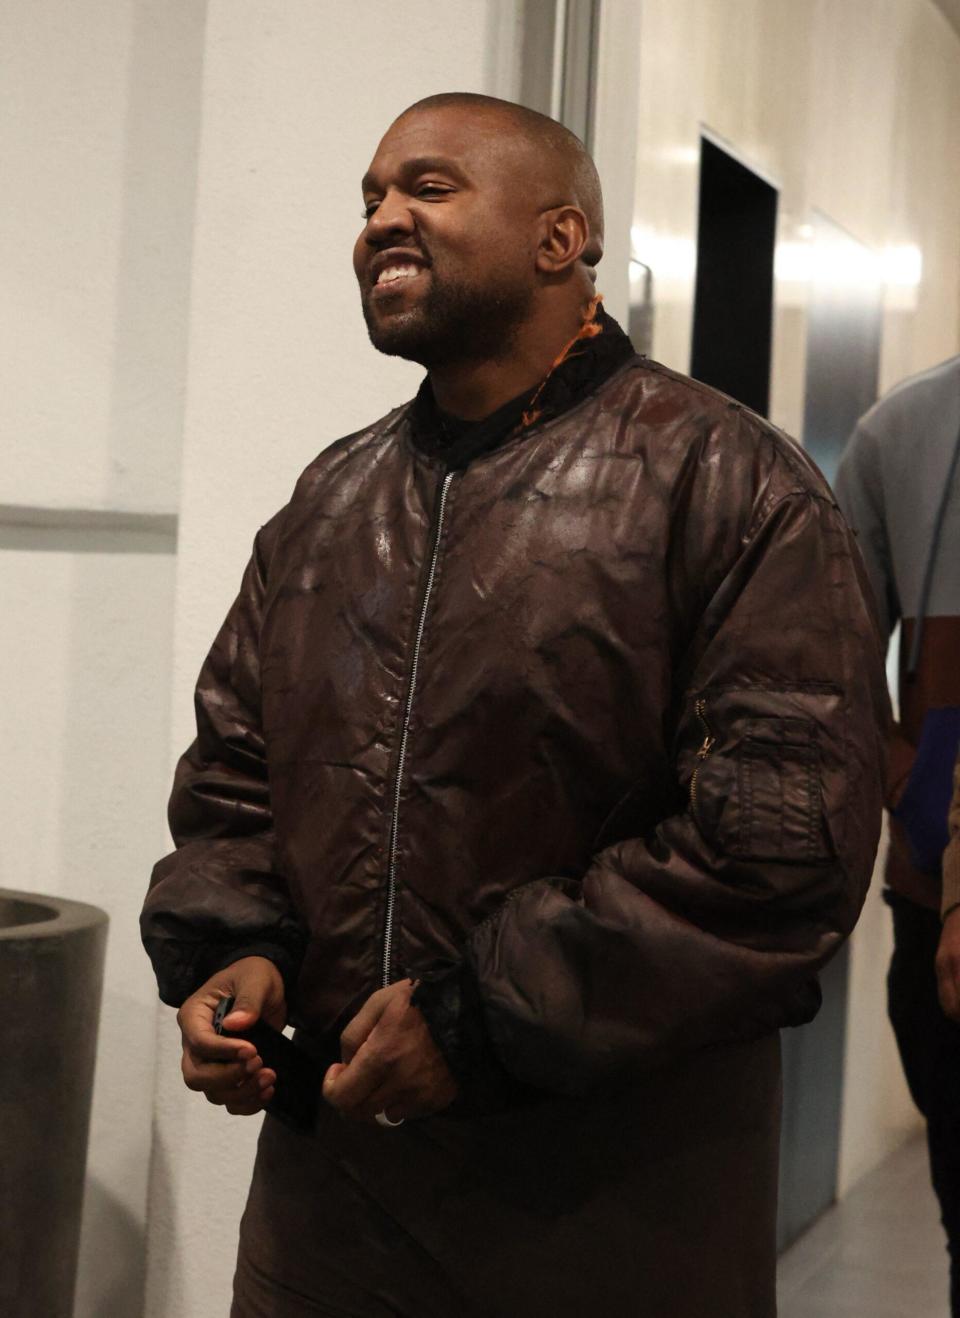 Kanye was seen leaving e.baldi restaurant smiling after dining with friends